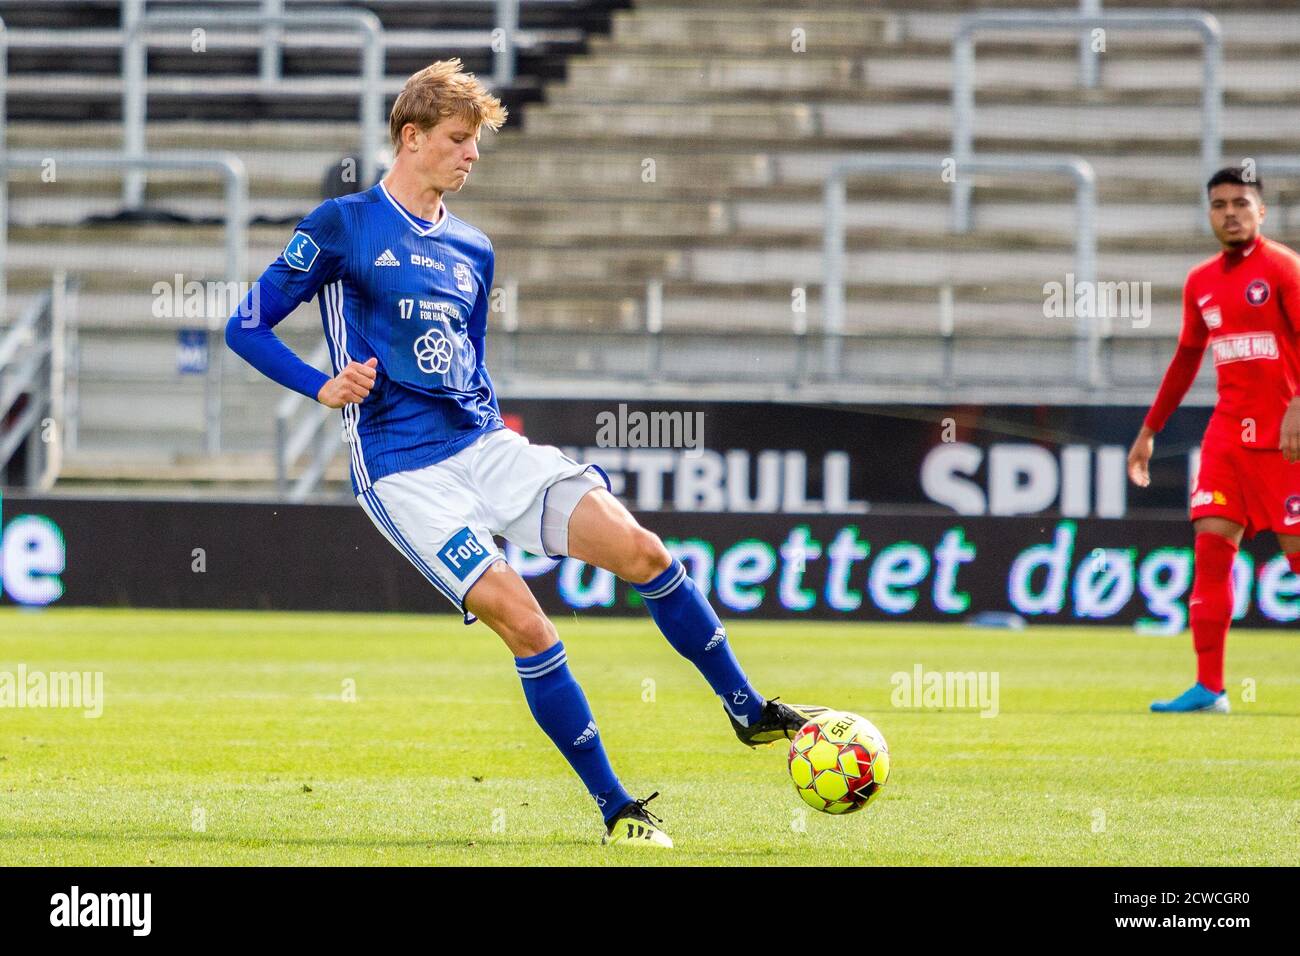 Lyngby, Denmark. 15th, September 2019. Frederik Winther (6) of Lyngby seen during the 3F Superliga match between Lyngby Boldklub and FC Midtjylland at Lyngby Stadium. (Photo credit: Gonzales Photo - Dejan Obretkovic). Stock Photo